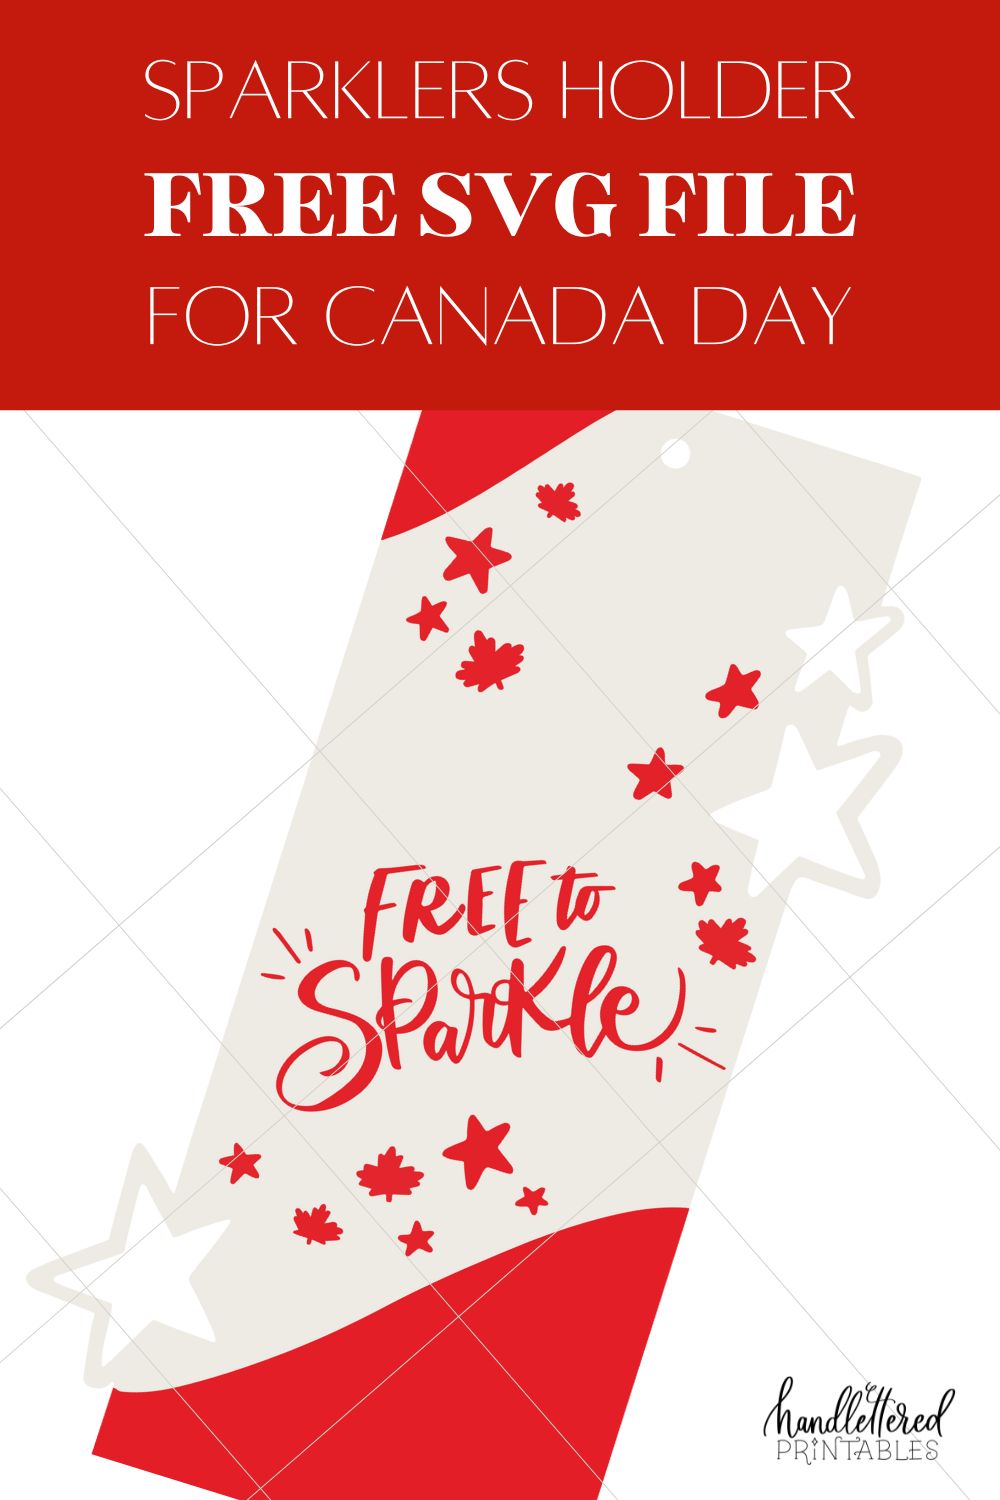 image showing cut file on a white background cut file reads: free to sparkle in hand lettering with maple leaves and stars text over image reads: sparklers holder free svg file for canada day